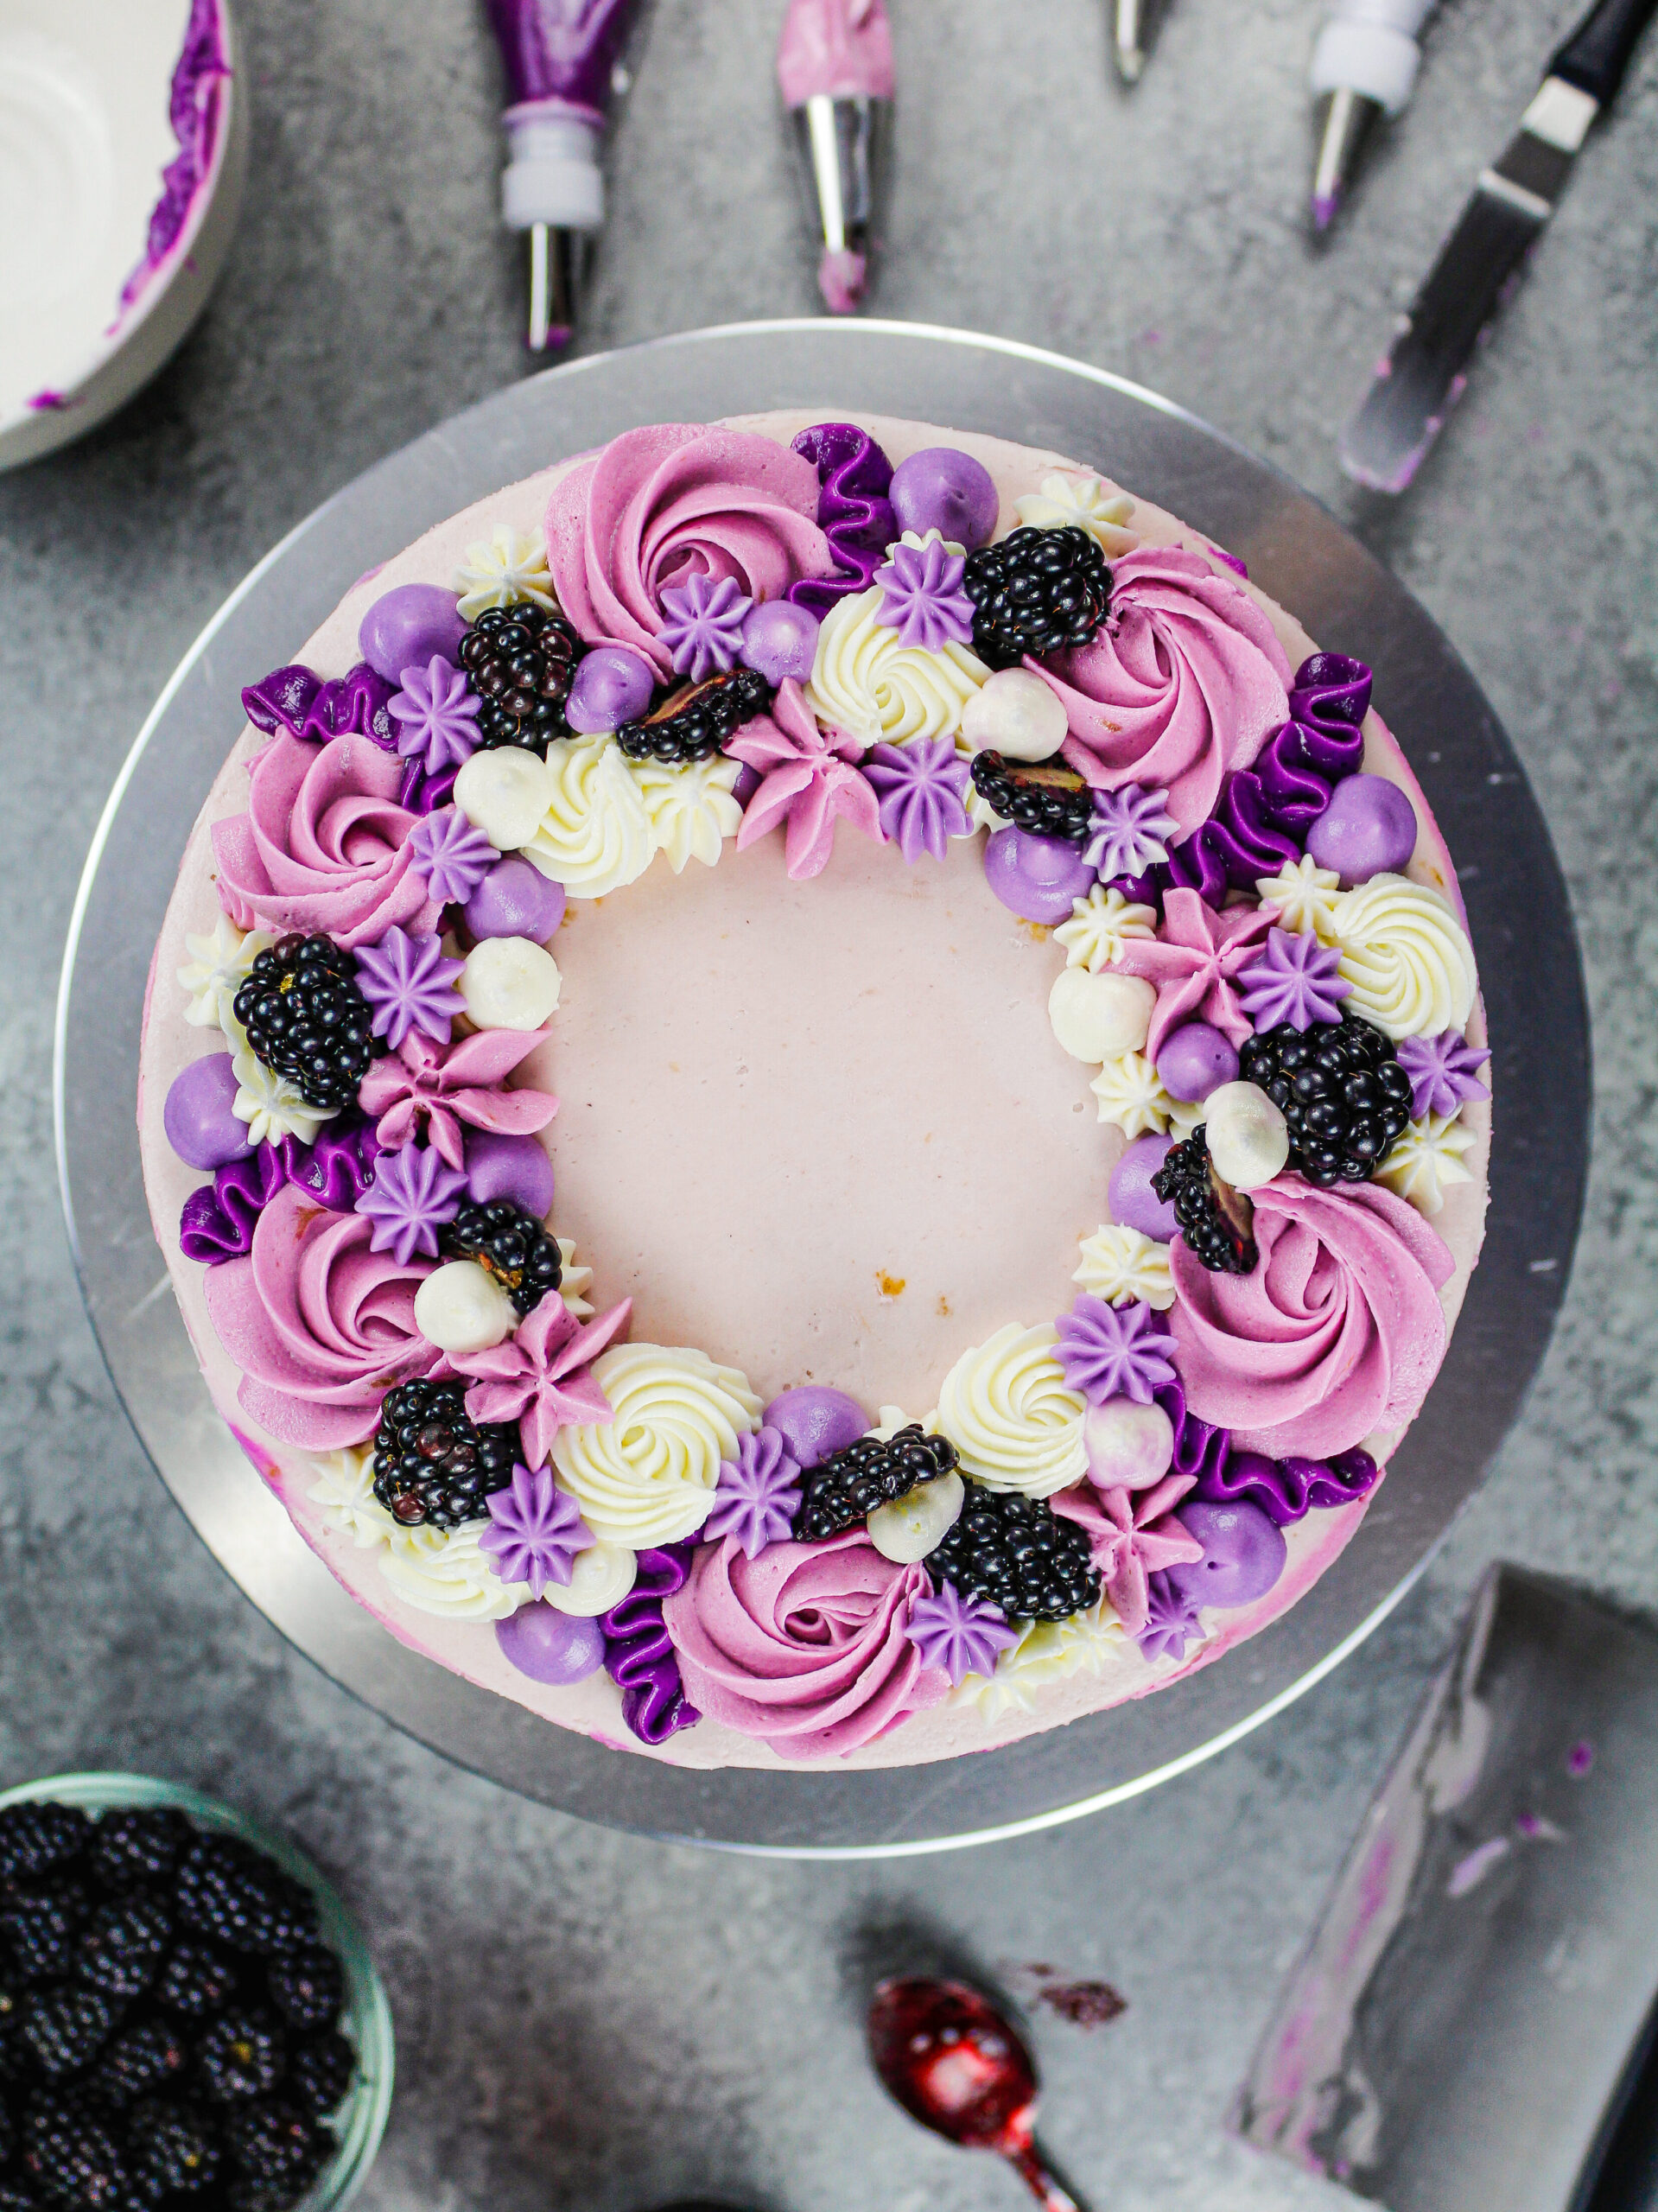 image of a pretty blackberry layer cake decorated with purple buttercream and fresh blackberries